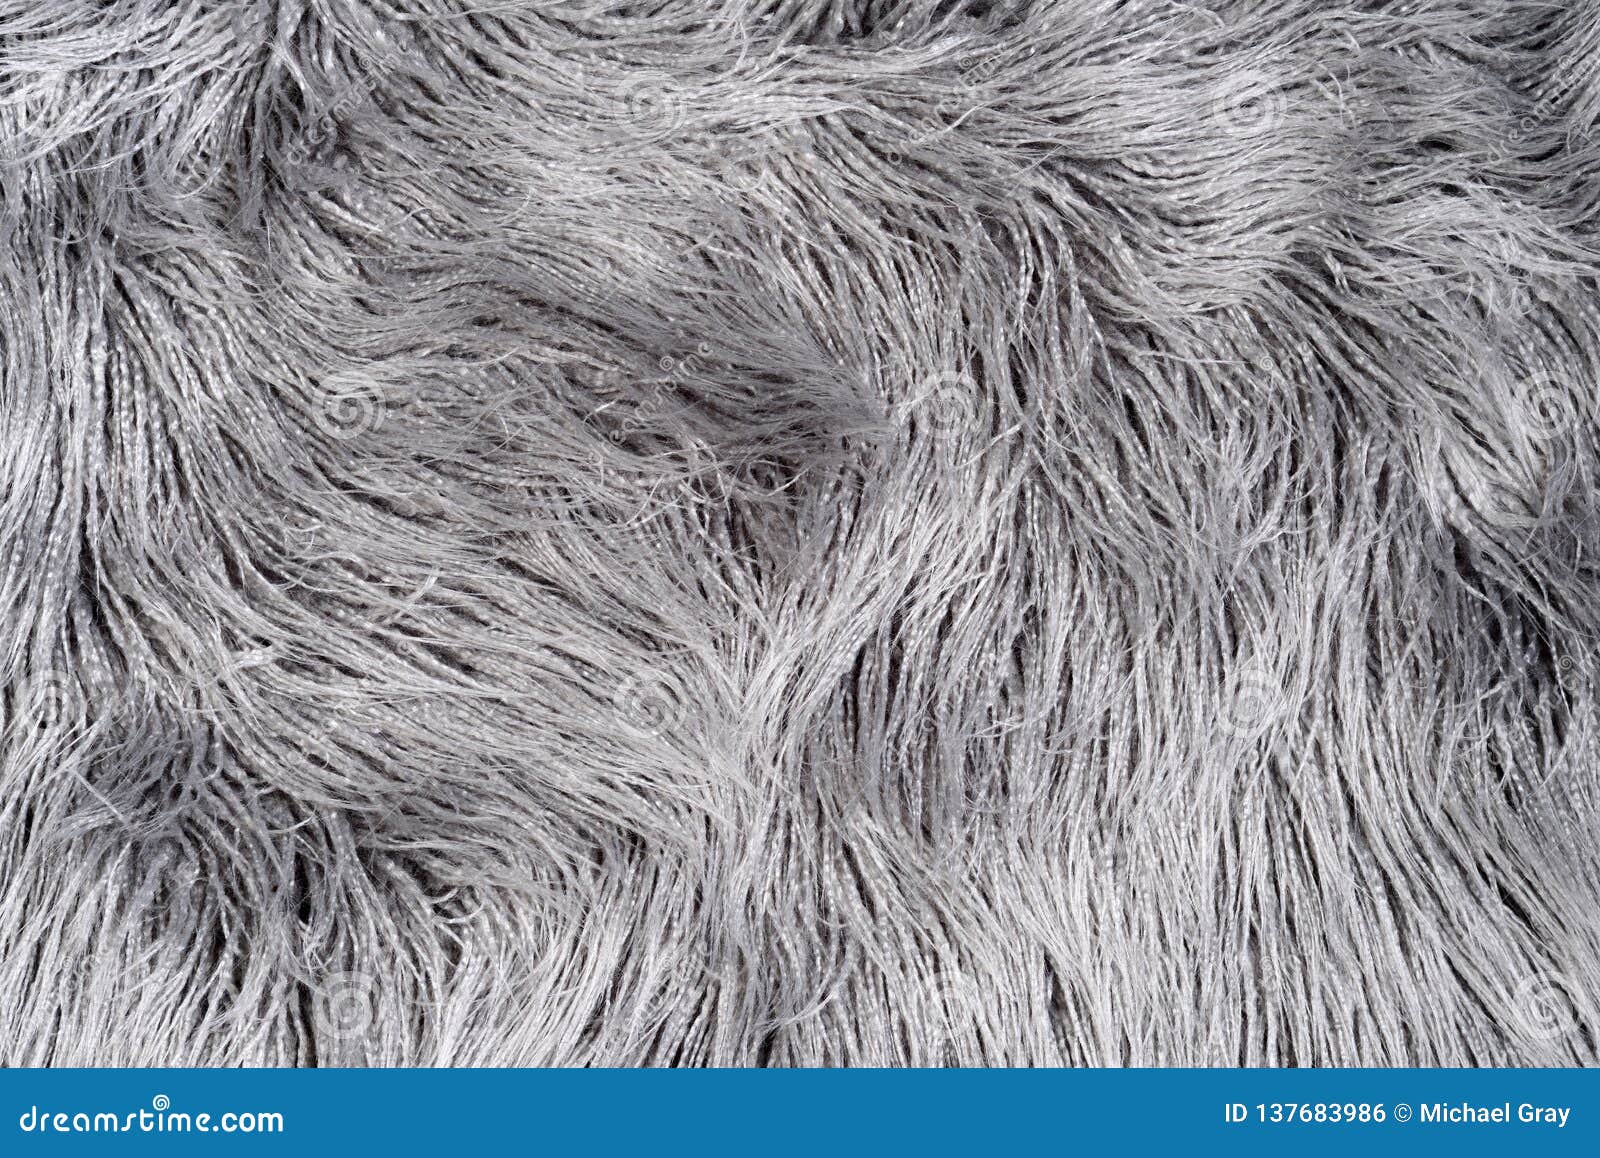 Fake Faux Fur Rug Background Stock Photo - Image of gray, grey: 137683986